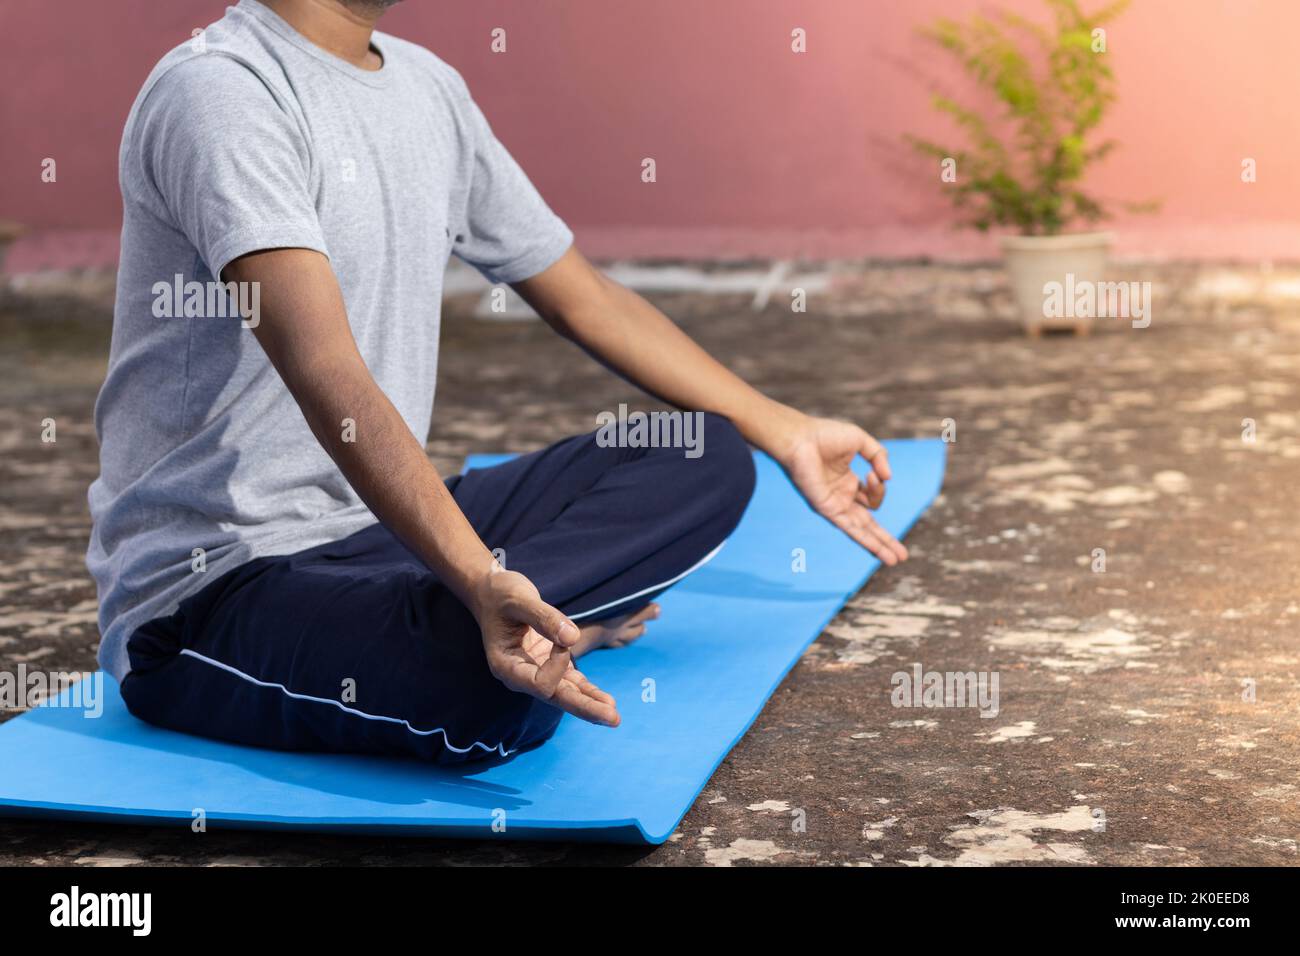 An Indian girl child practicing yoga on yoga mat outdoors Stock